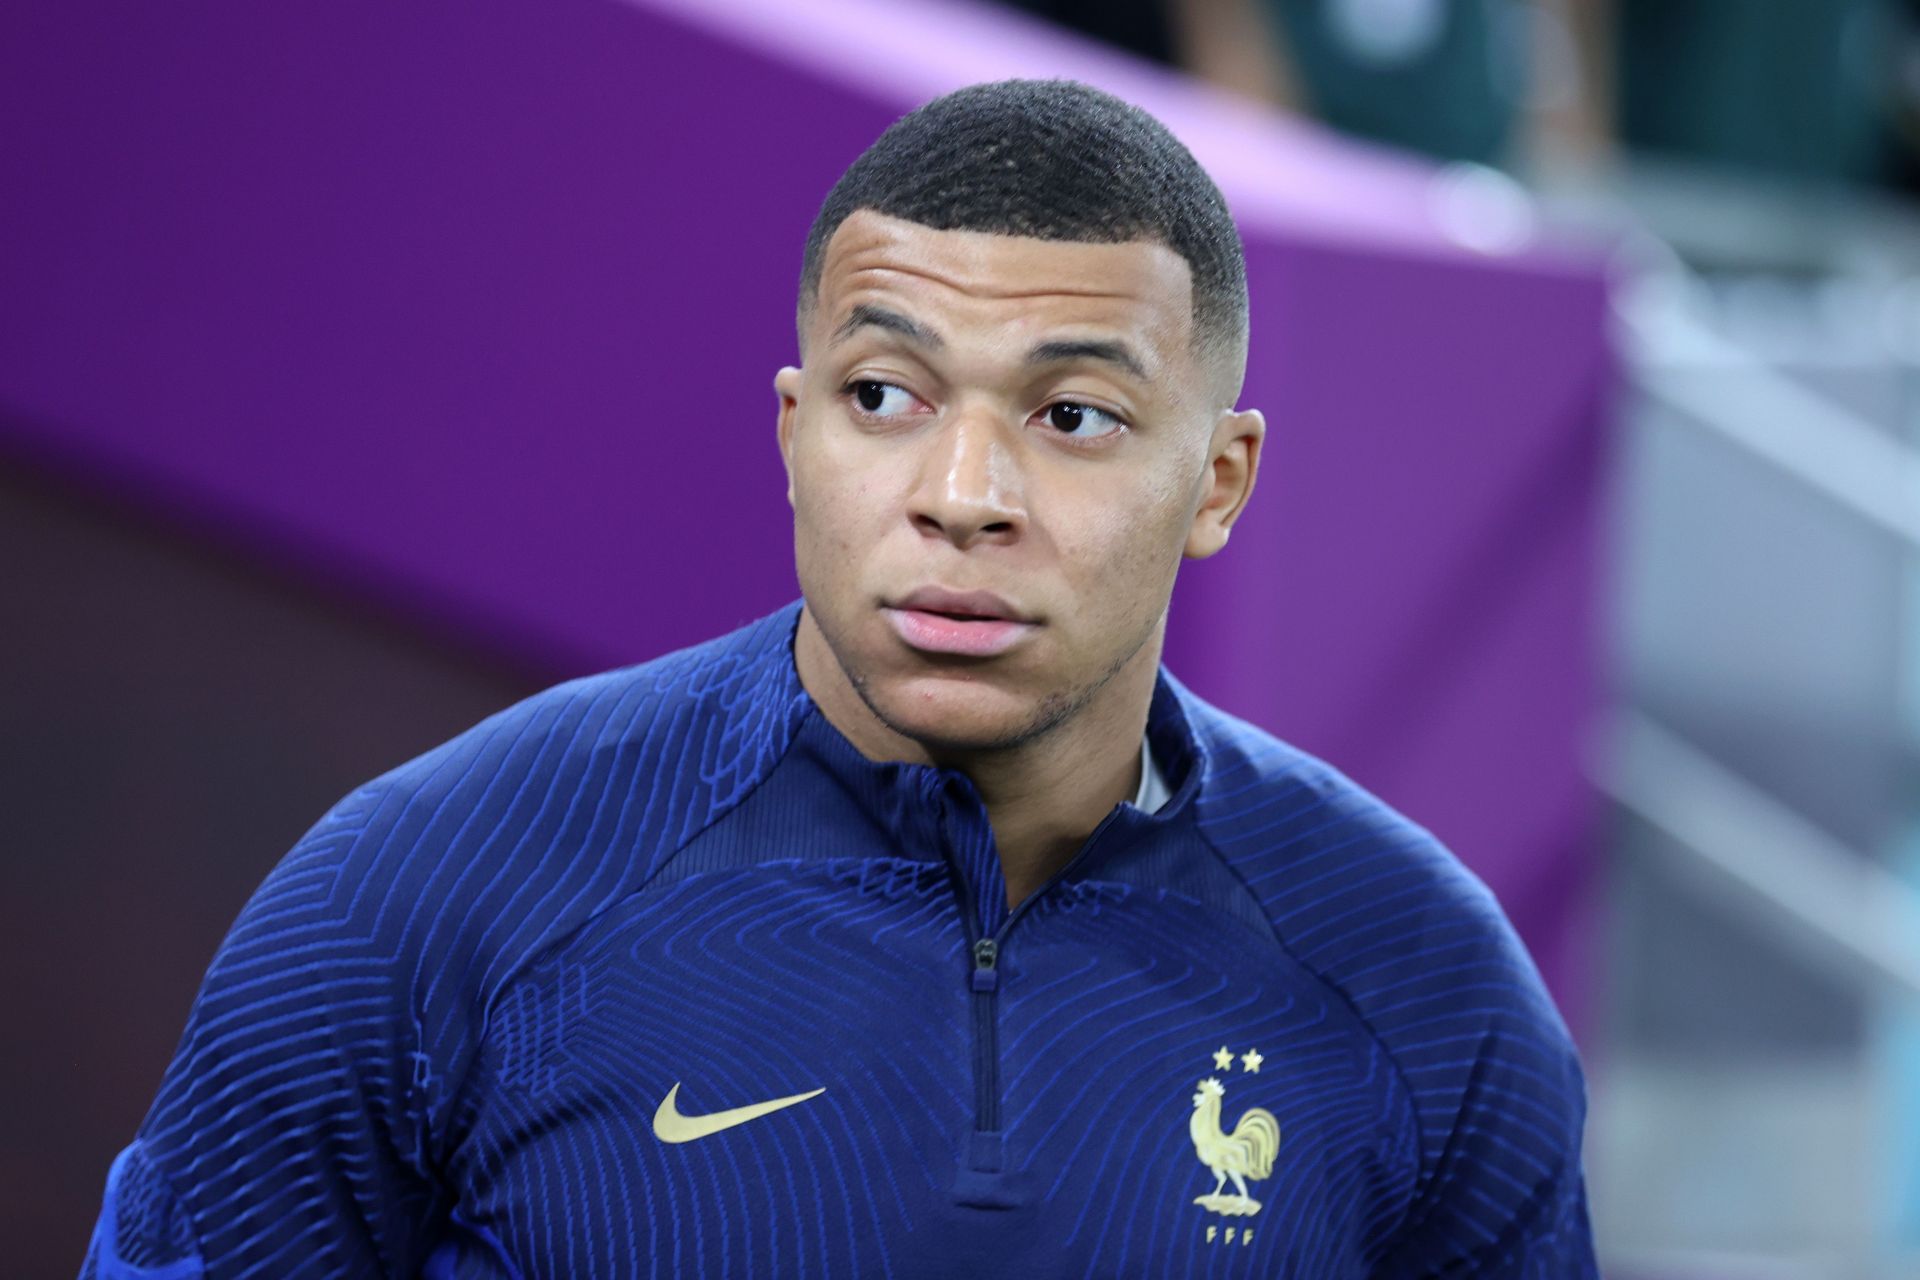 Mbappe has been in scintillating form